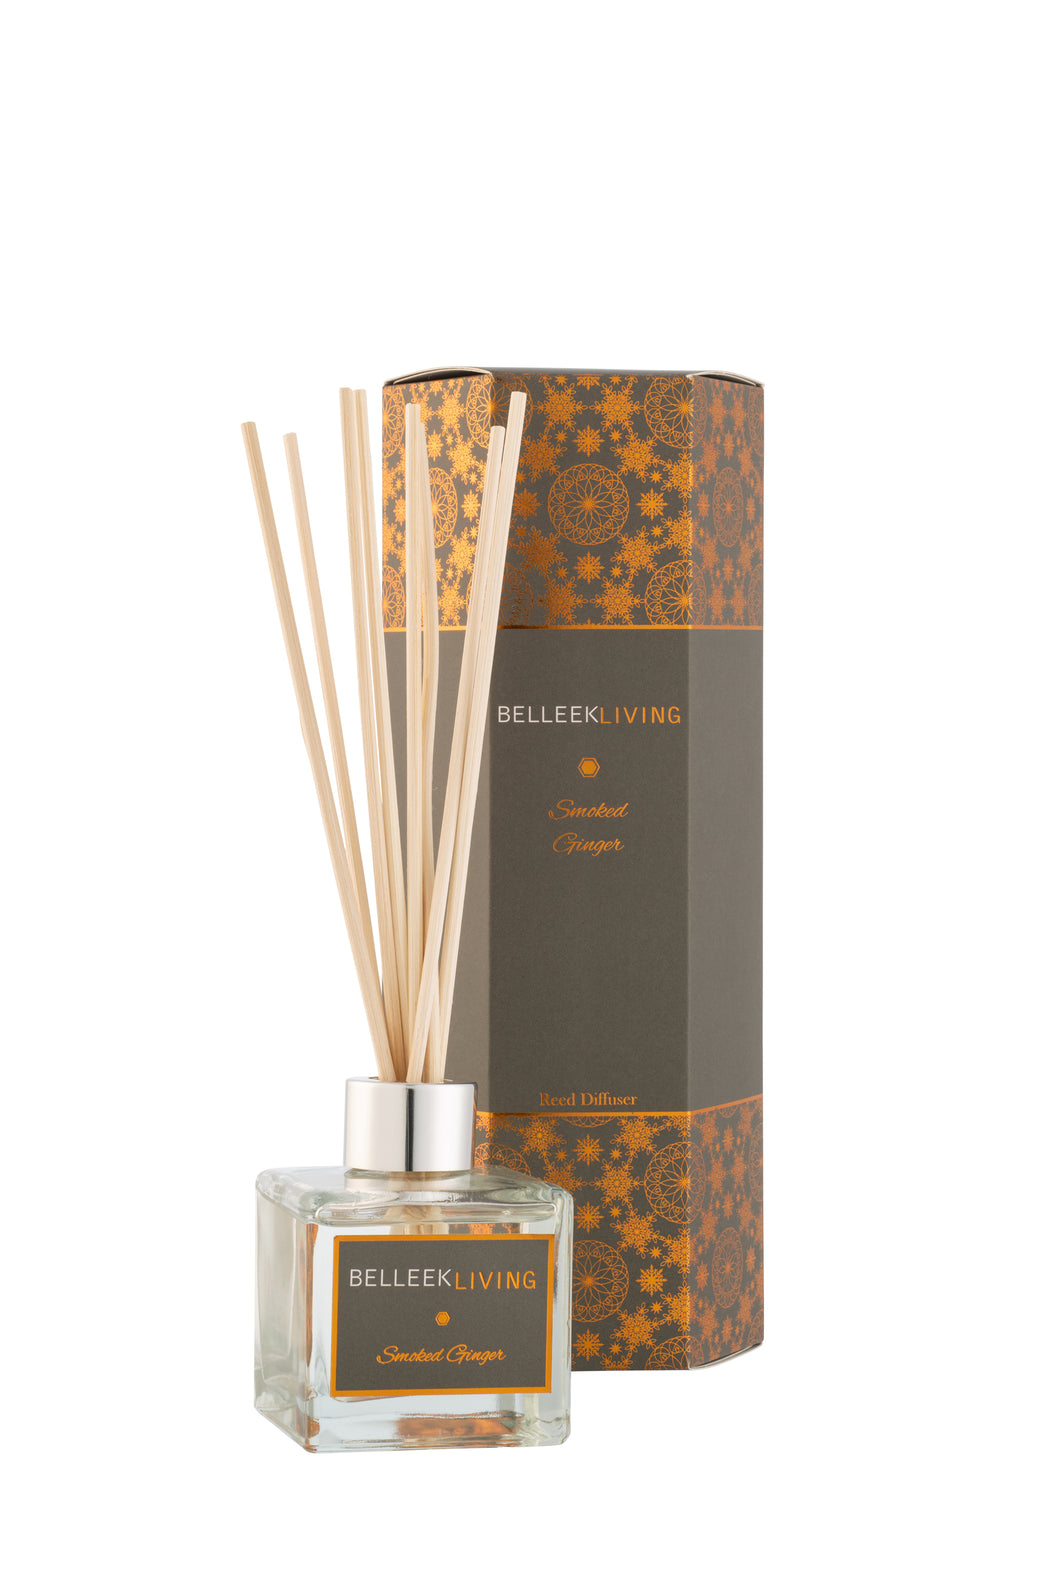 Belleek Living Smoked Ginger Diffuser.  Exotic, spicy top notes of star anise, clove and nutmeg are gently blended with warning ginger and earthy frankincense middle notes  Sandalwood, sweet musk and golden amber base notes compliment these to create subtle yet sultry fragrance. Scent Lasts up to 6 weeks Measures - 6cmW x 8cmH x 23cmH (including reeds)